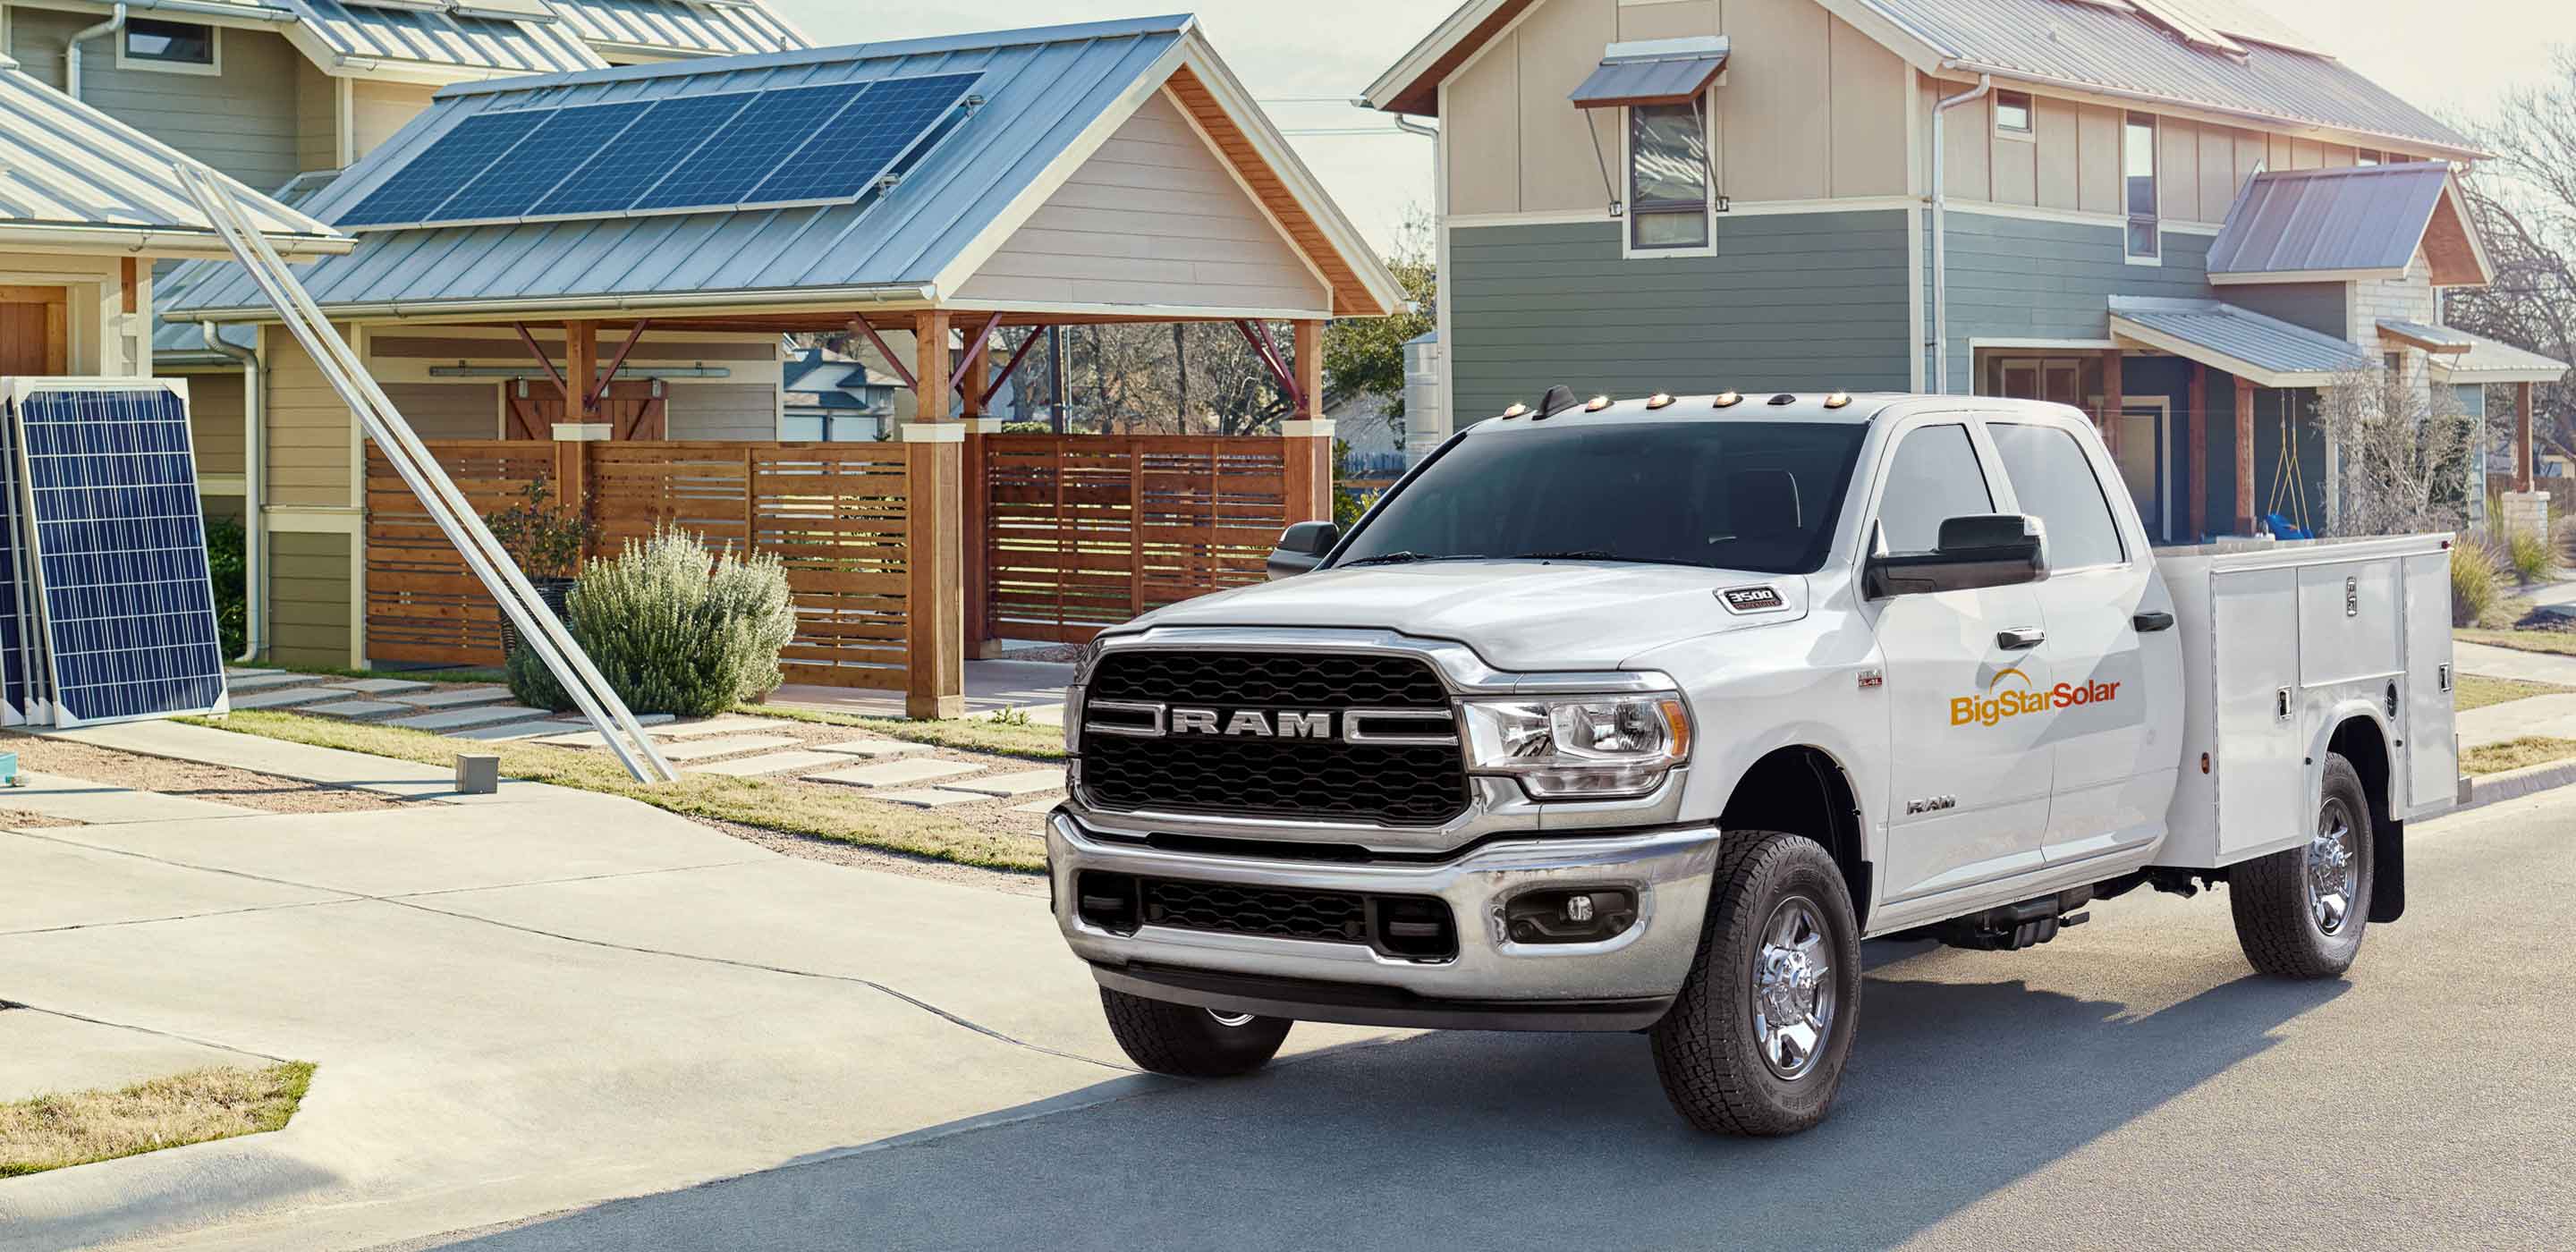 Display The 2022 Ram Chassis Cab with a solar company logo on its side, parked in front of a home with solar panels on the garage roof.